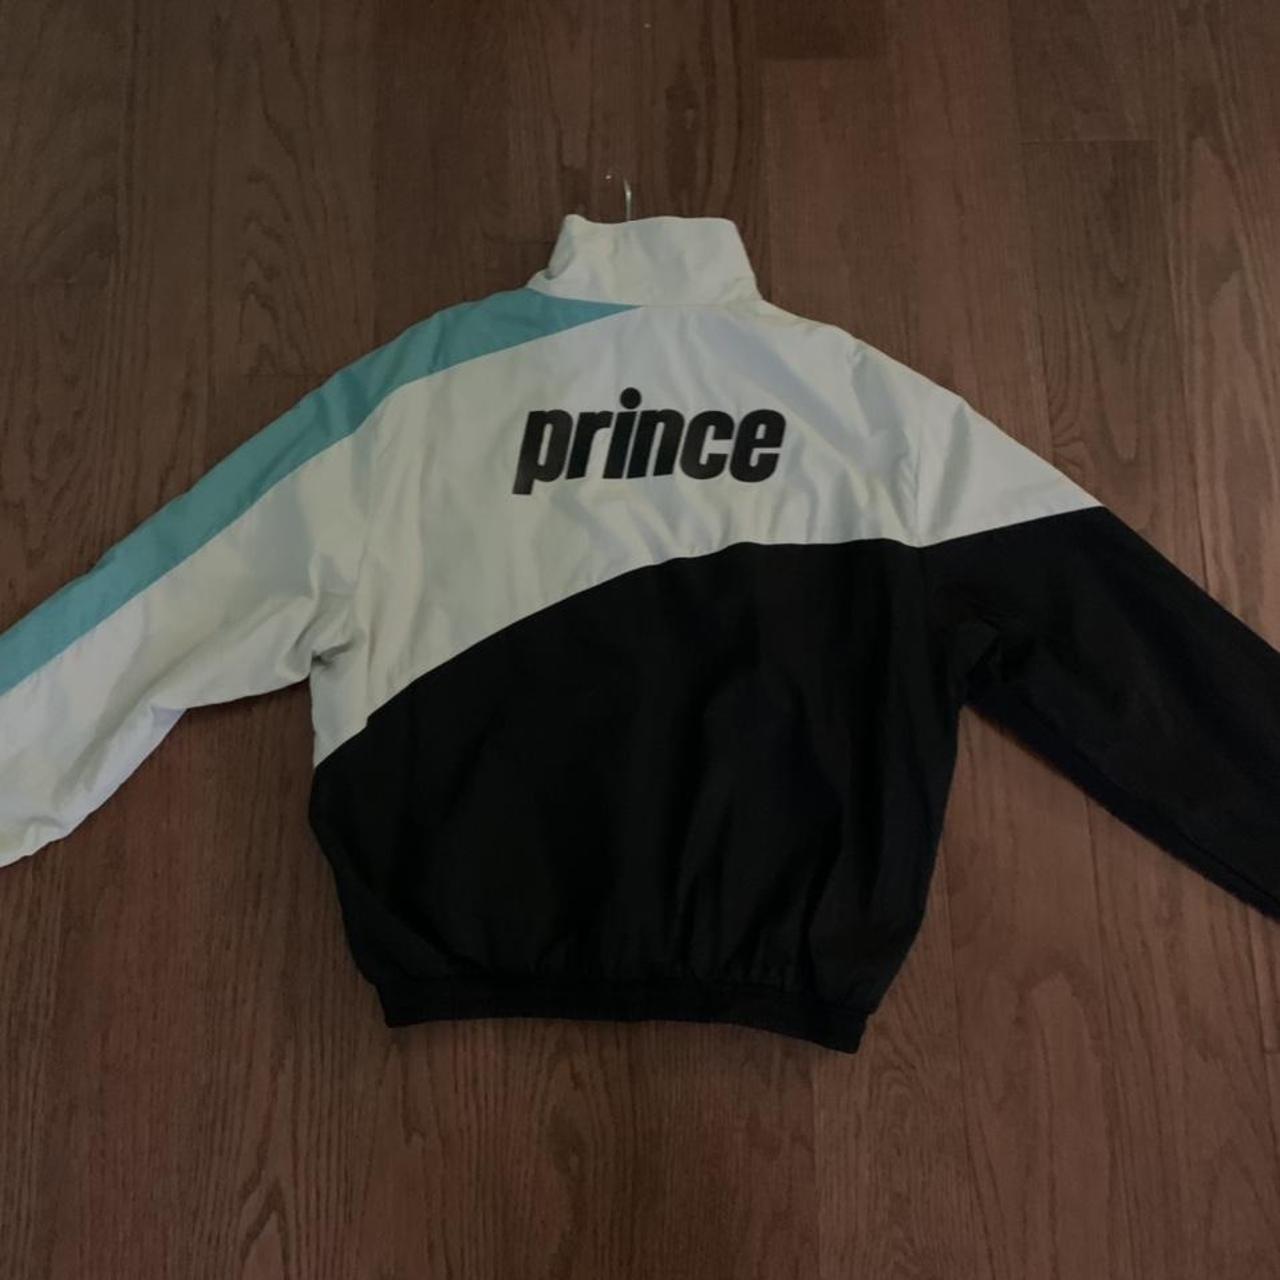 Prince Men's Cream and Green Jacket (2)